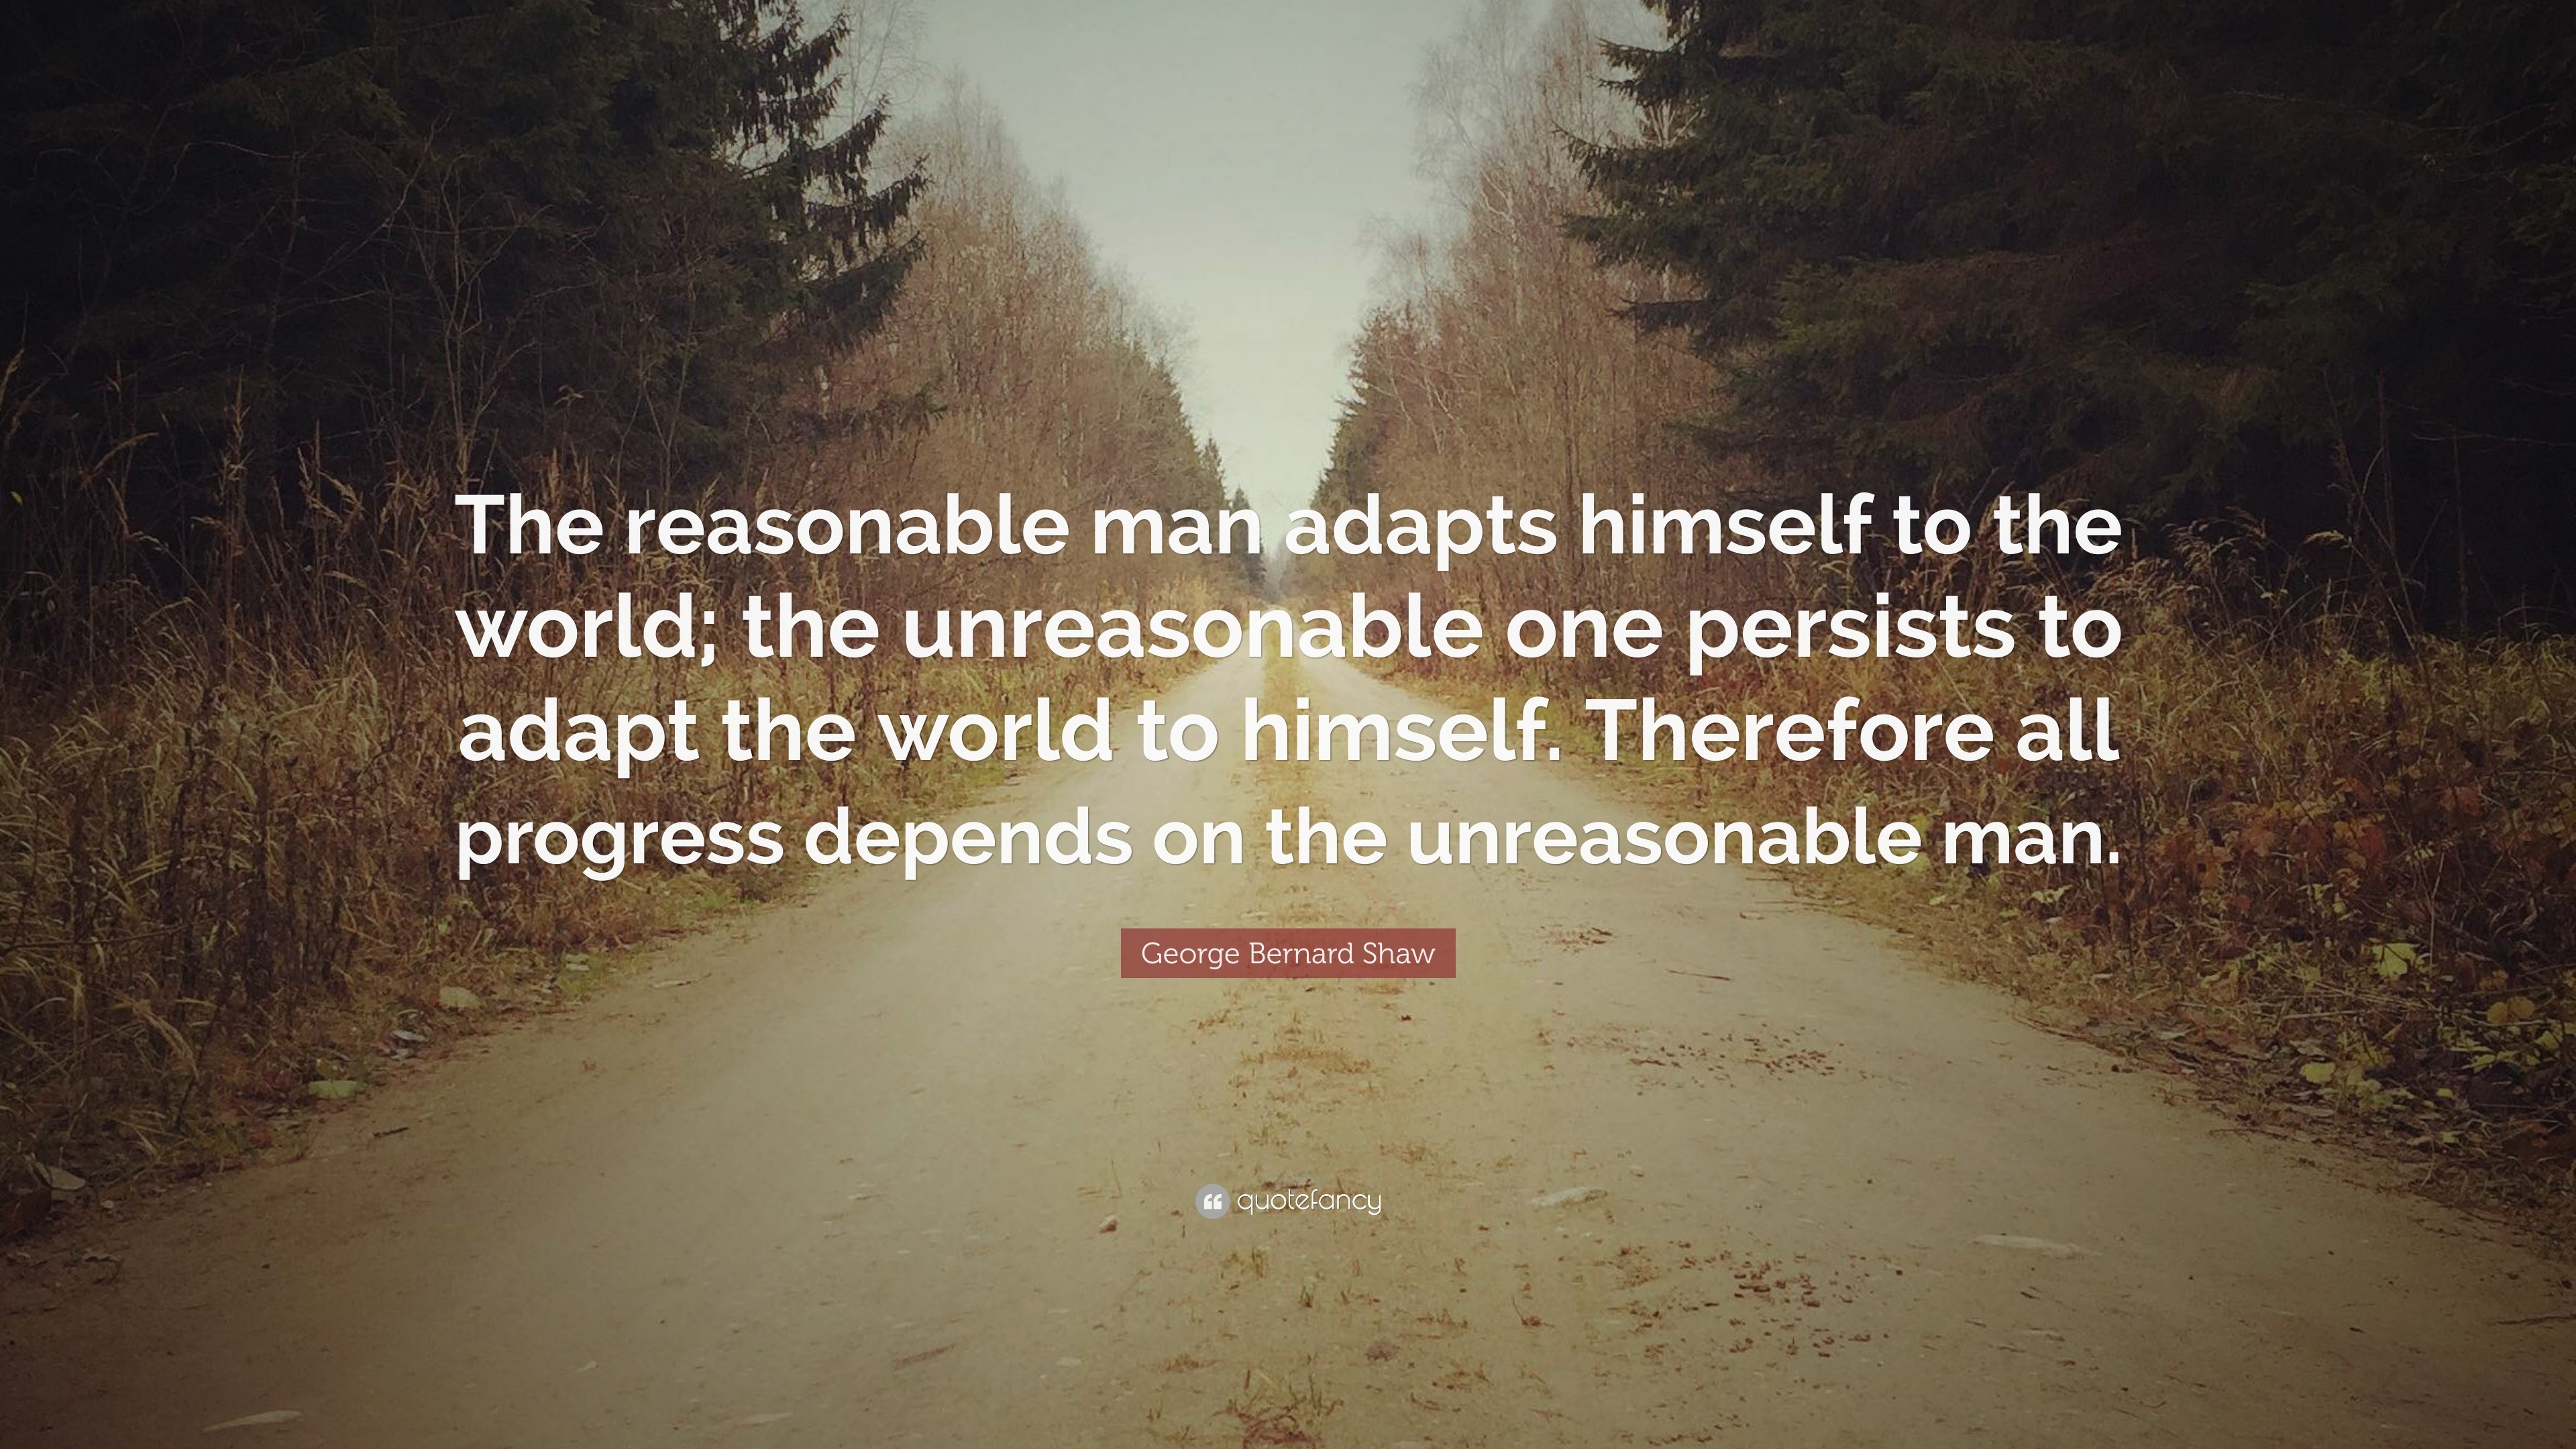 George Bernard Shaw Quote: “The Reasonable Man Adapts Himself To The World; The Unreasonable One Persists To Adapt The World To Himself. Therefore A...”